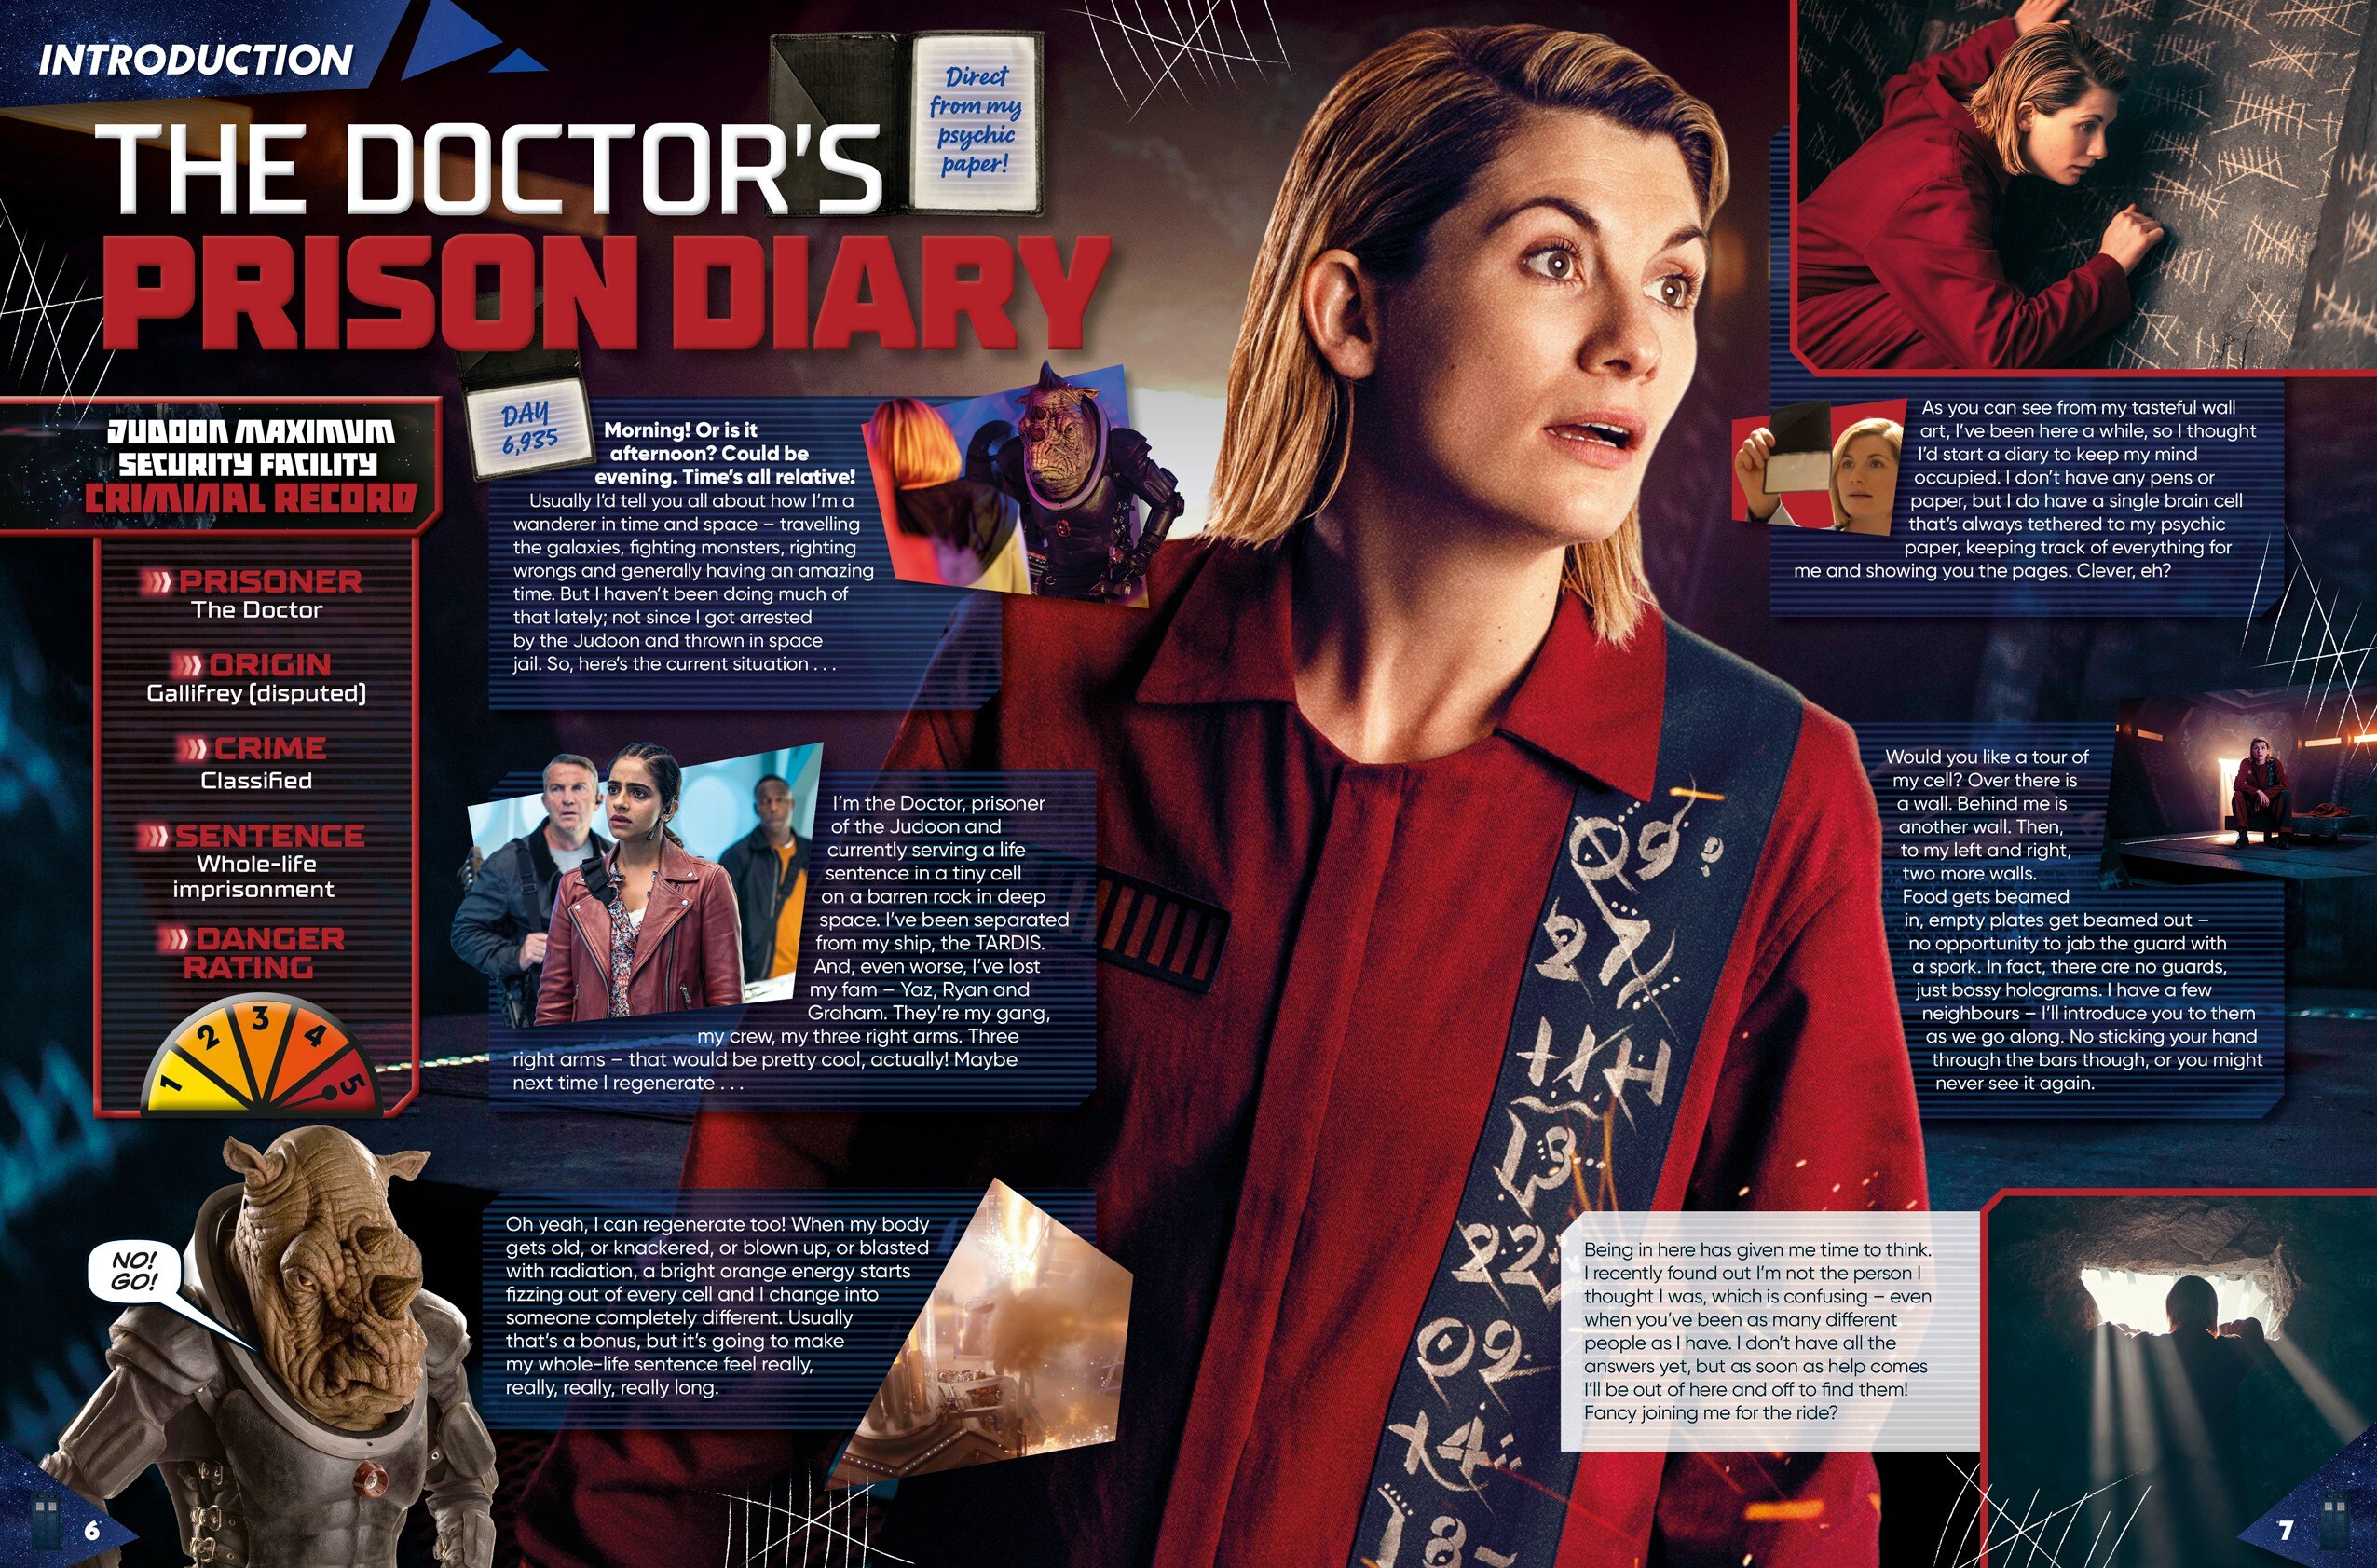 The Doctor's Prison Diary